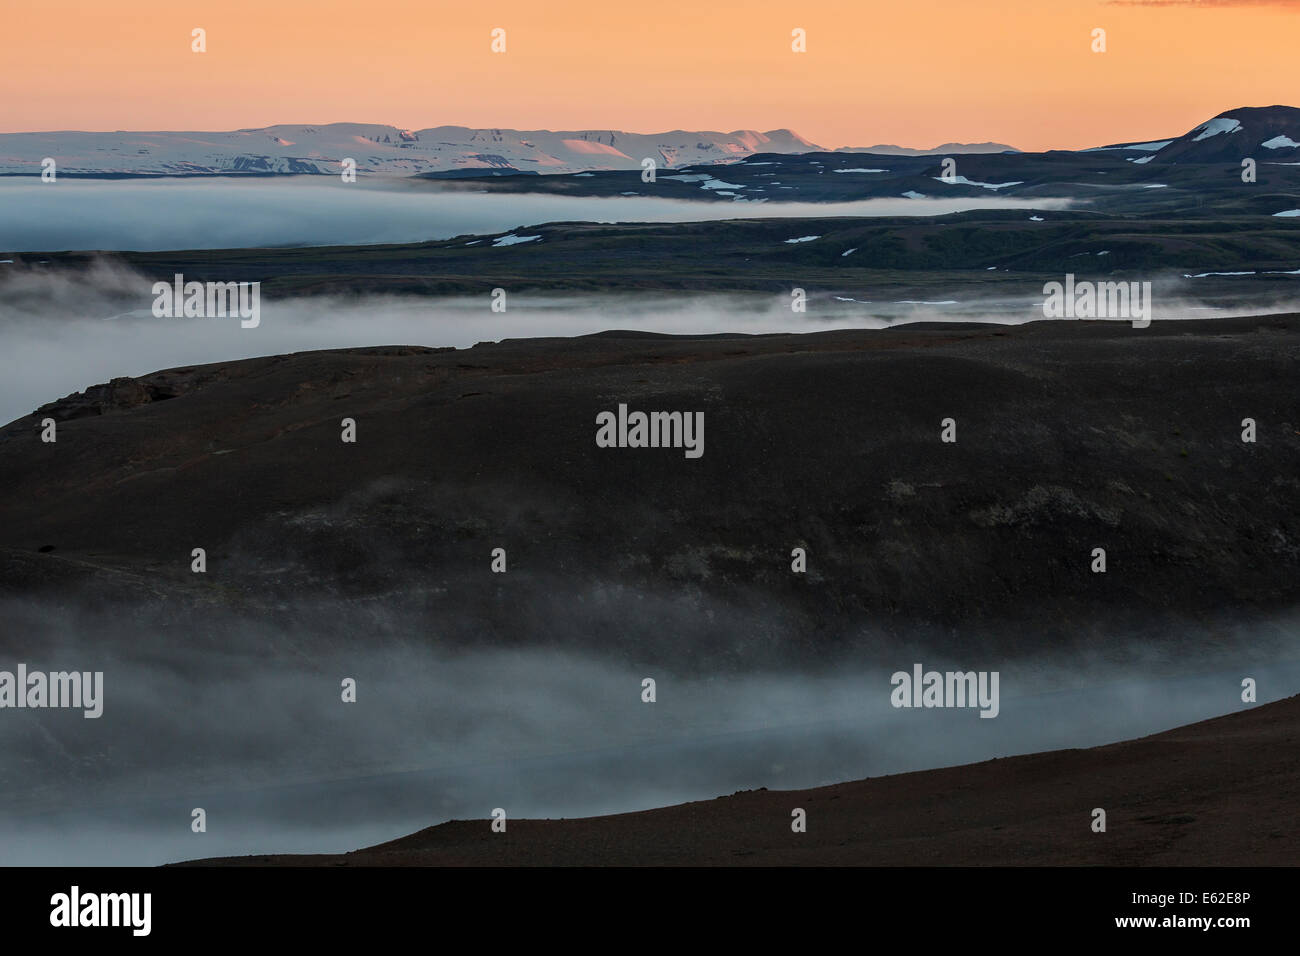 Steam and foggy landscape by The Bjarnarflag Geothermal Power Plant, Lake Myvatn area, Northern Iceland Stock Photo